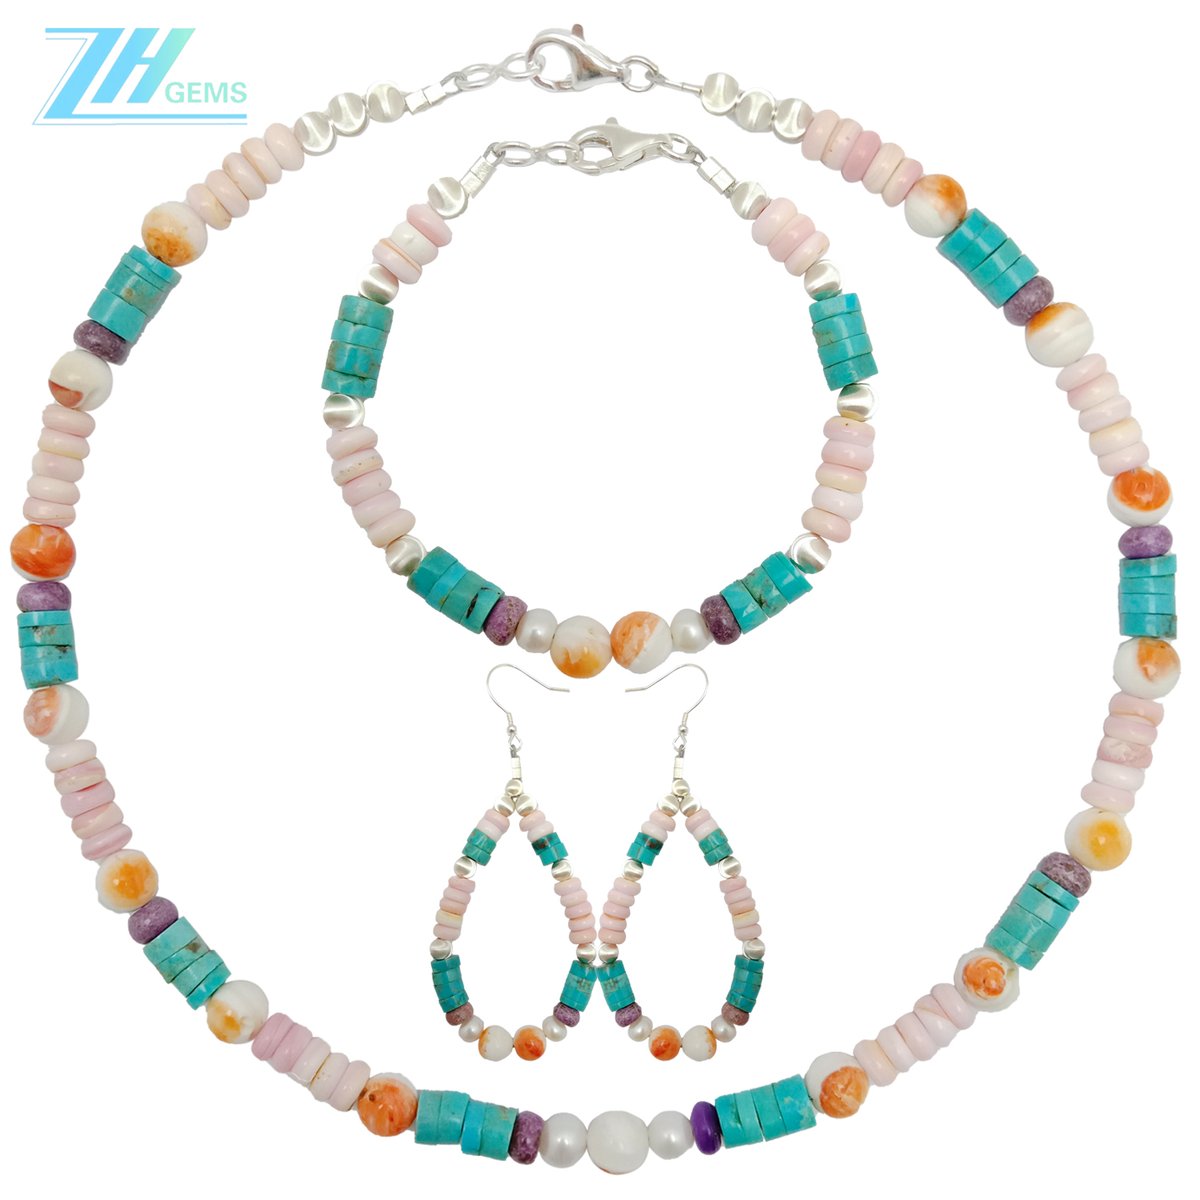 Natural turquoise and spiny oyster roundle beads with pink shell  925silver Cat-eye silver bead  pearl Charoite Multi Stone Beaded jewelry set Unique Gifts for Women  20240422-01-08  #EnvisionGreatness   #navajojewelry   #turquoisejewelry   #turquoise   #satisfying